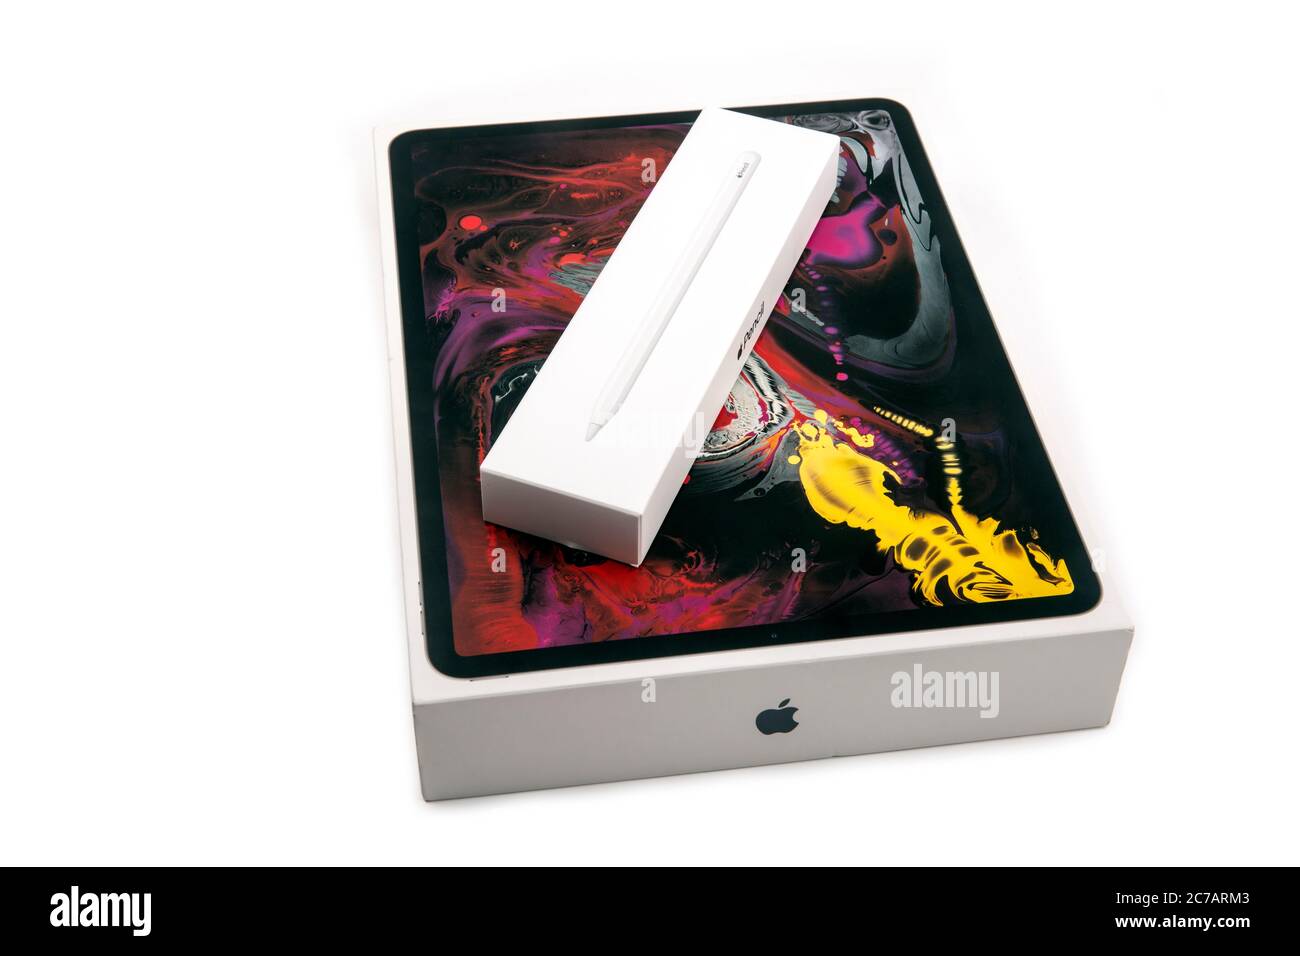 WETZLAR, GERMANY - 2020-07-10: APPLE iPad Pro is a tablet computer from the  iPad model line from Apple Stock Photo - Alamy